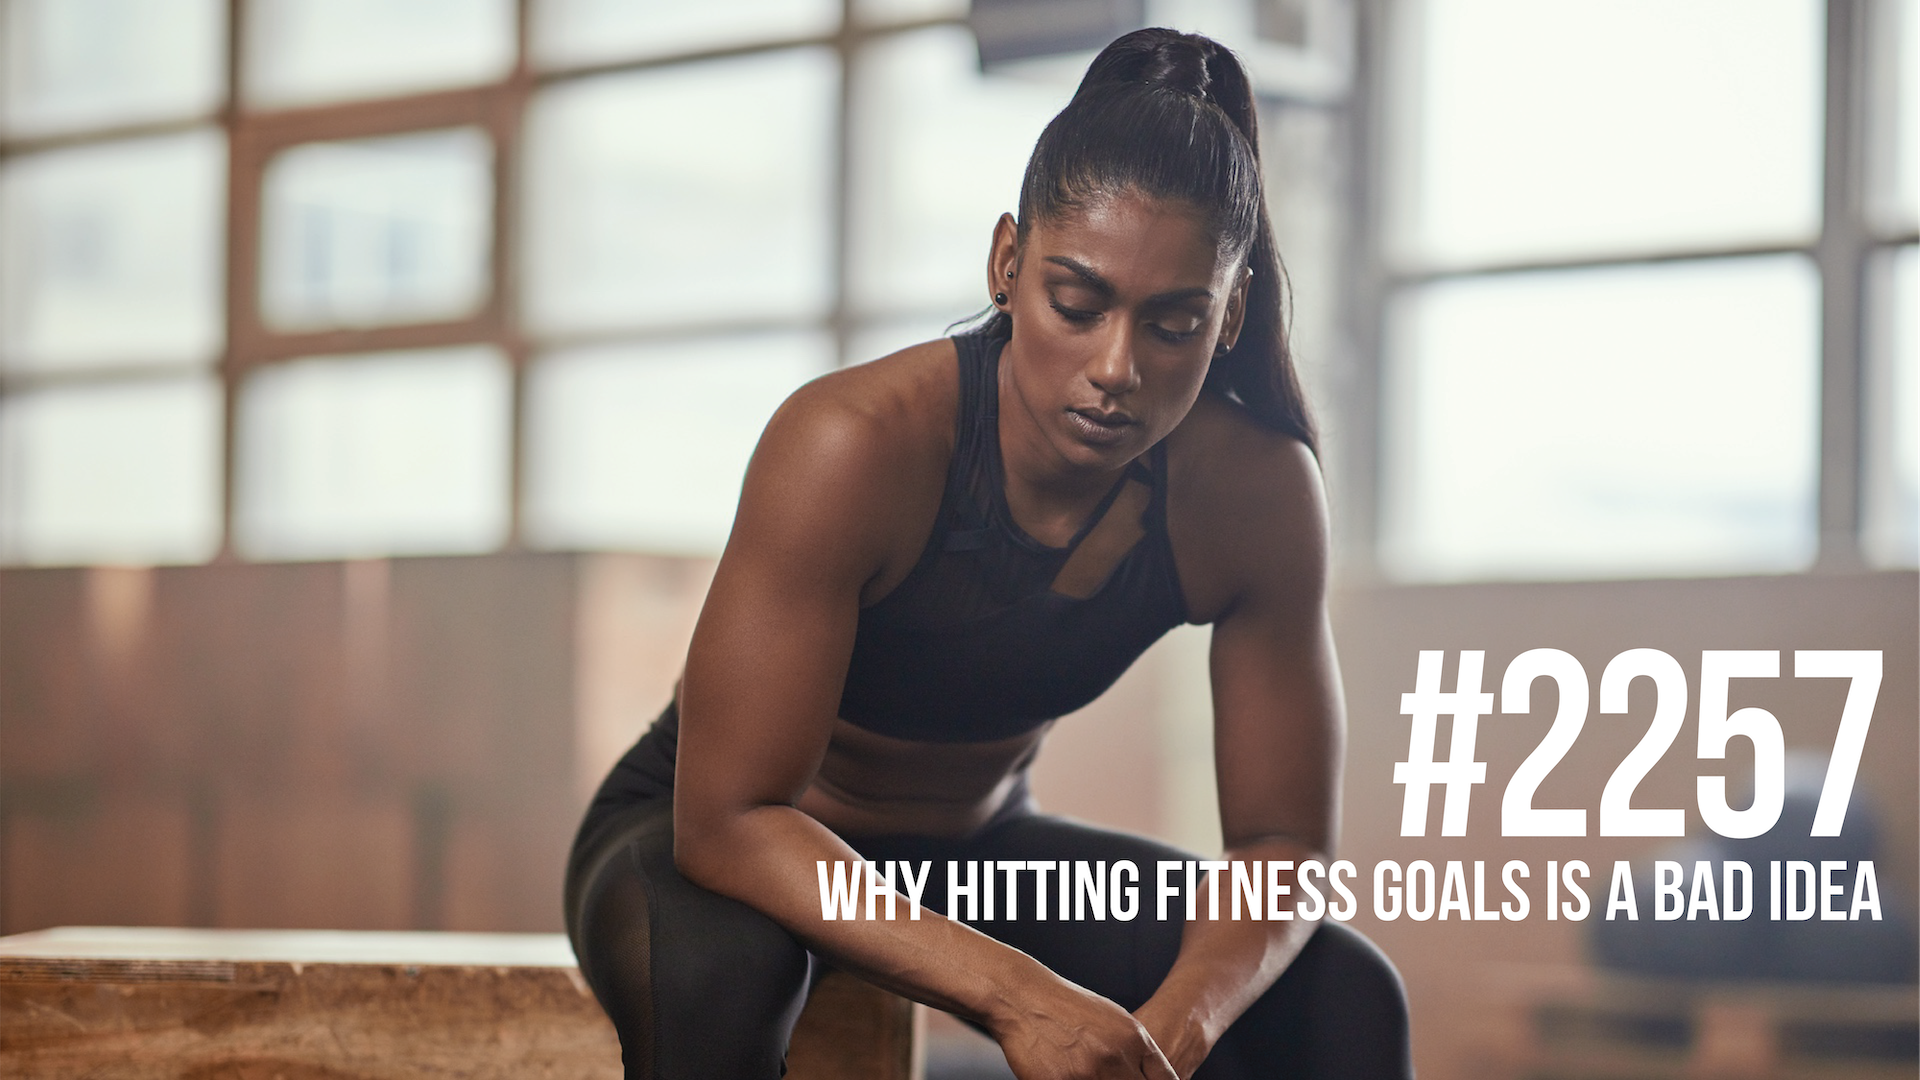 2257: Why Hitting Fitness Goals is a Bad Idea